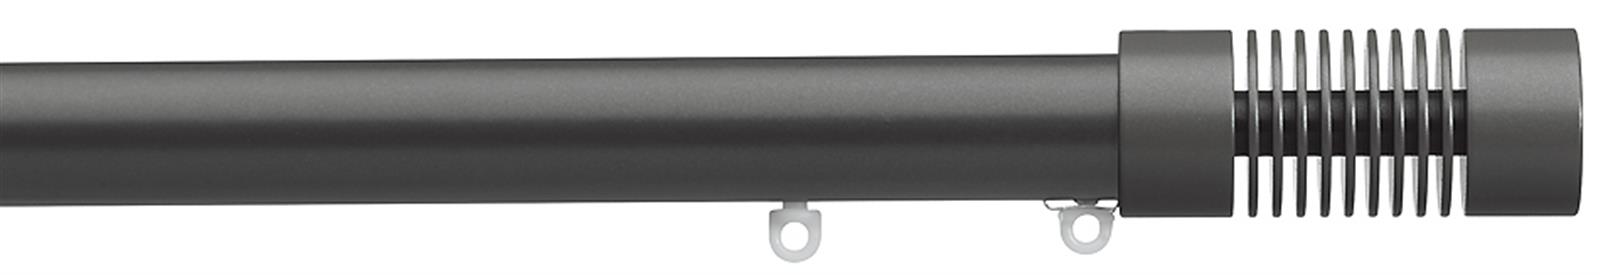 Silent Gliss Metropole 30mm 7610 Charcoal Groove Cylinder Finial